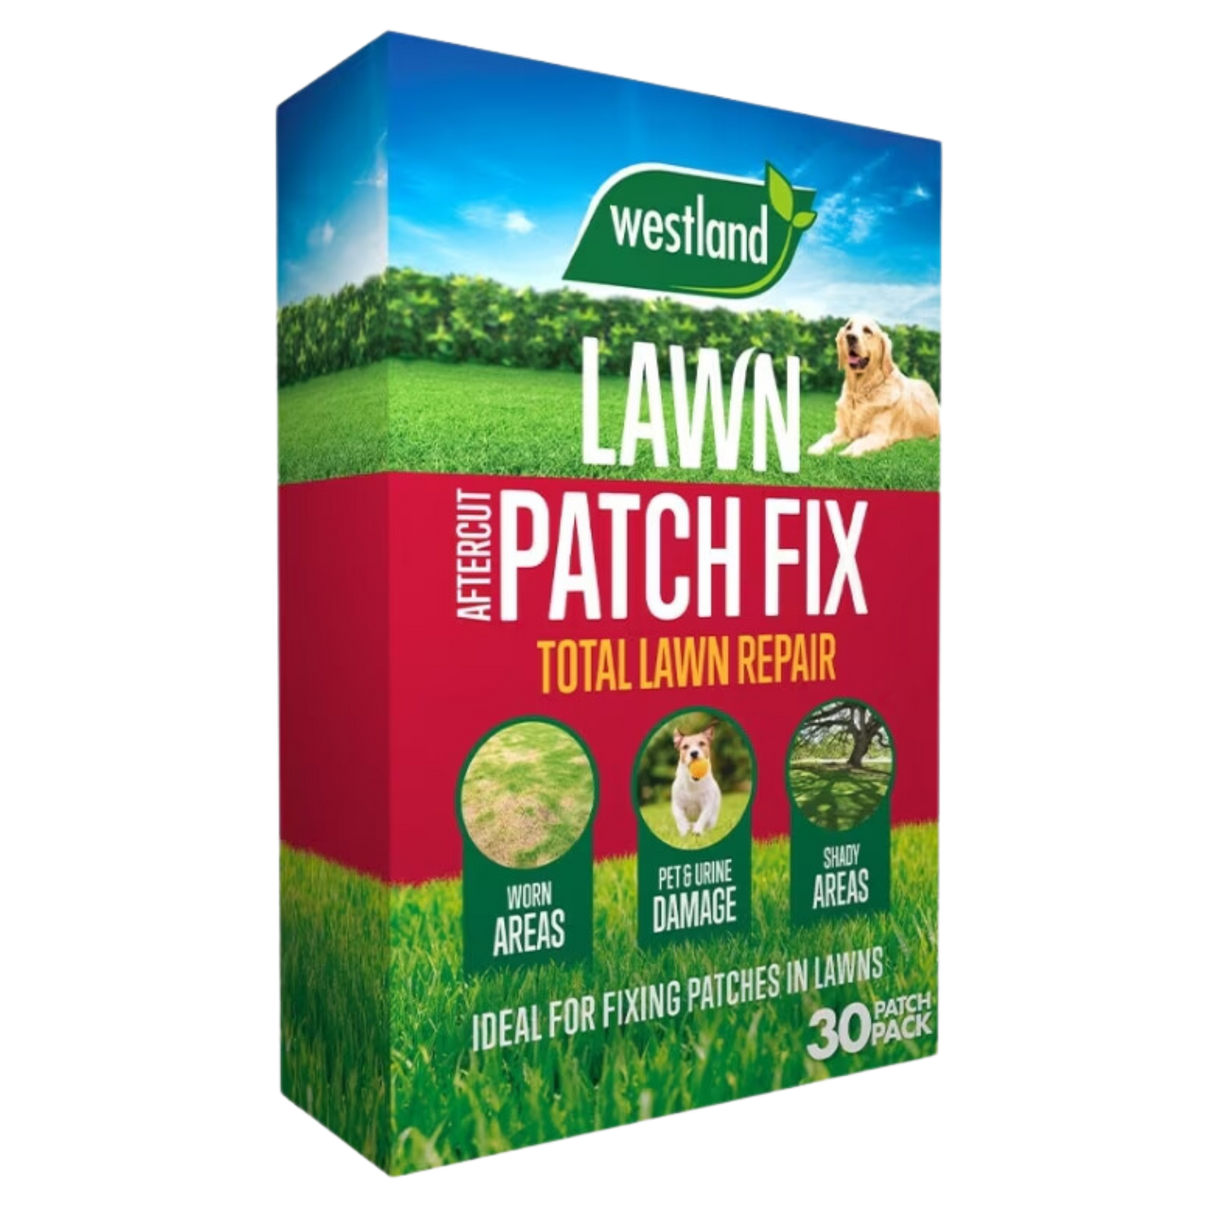 Add-on Lawn Patch Fix - 30 Patches